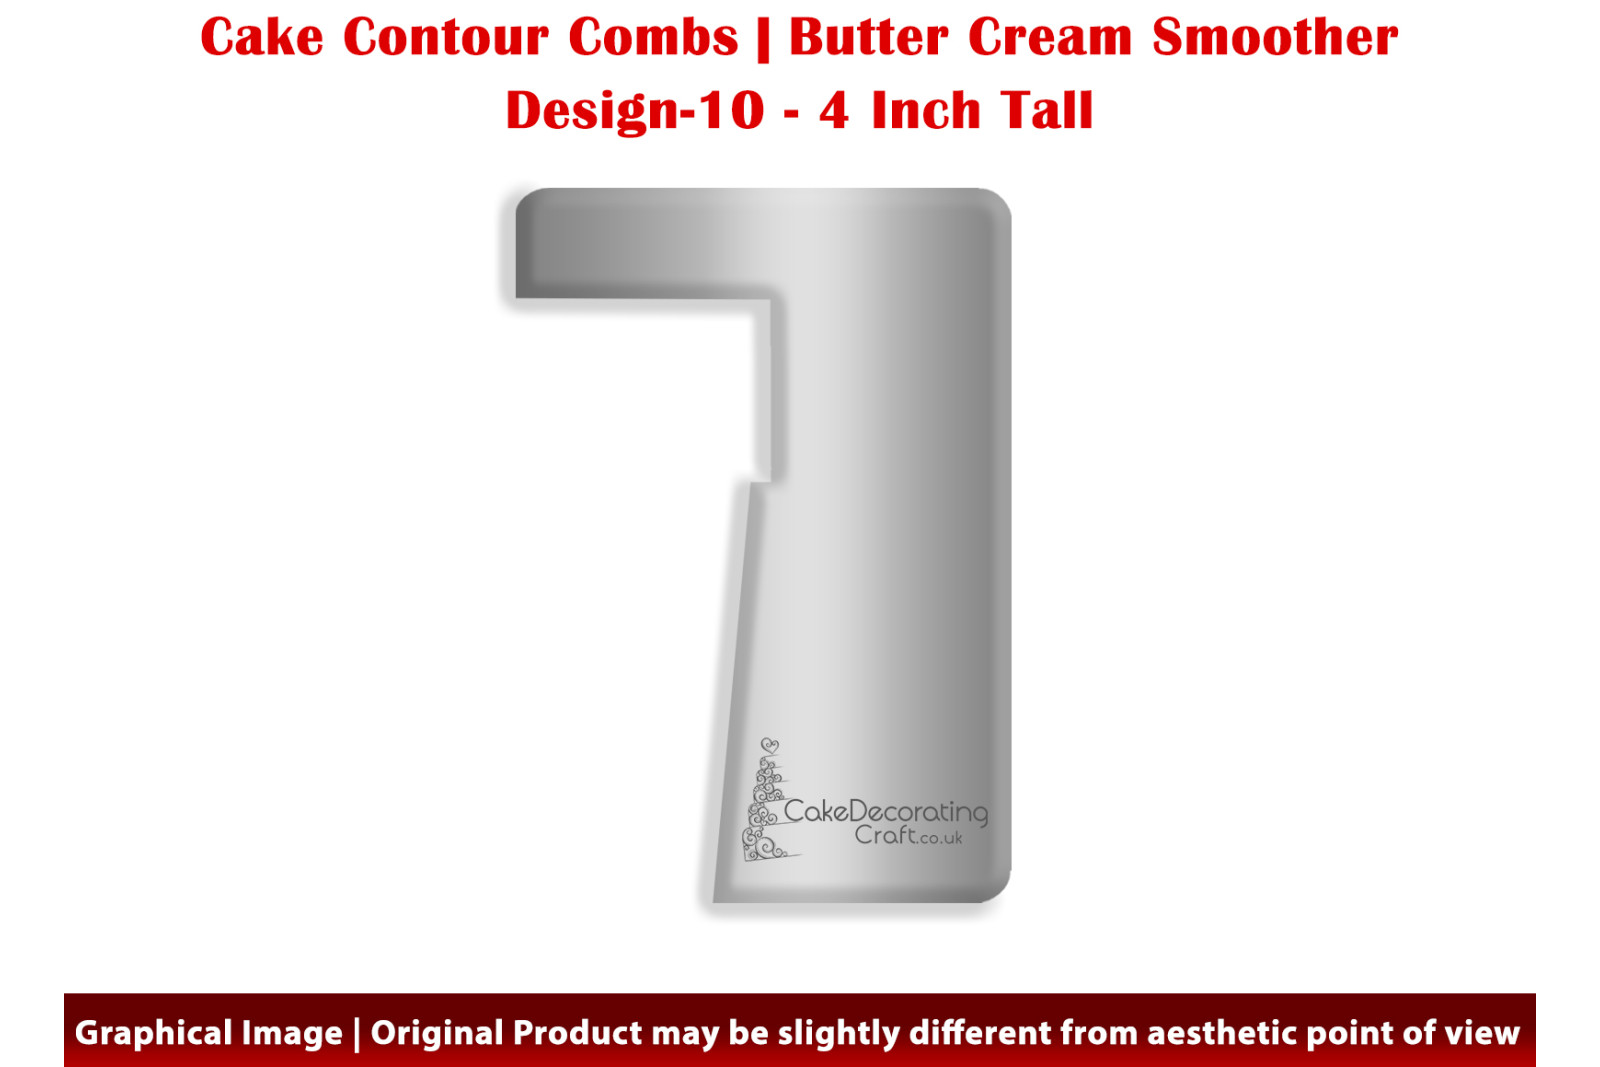 Flower Pot | 4 Inch | Cake Decorating Craft | Cake Contour Combs | Smoothing | Metal Spreader | Butter Cream Smoothing | Genius Tool